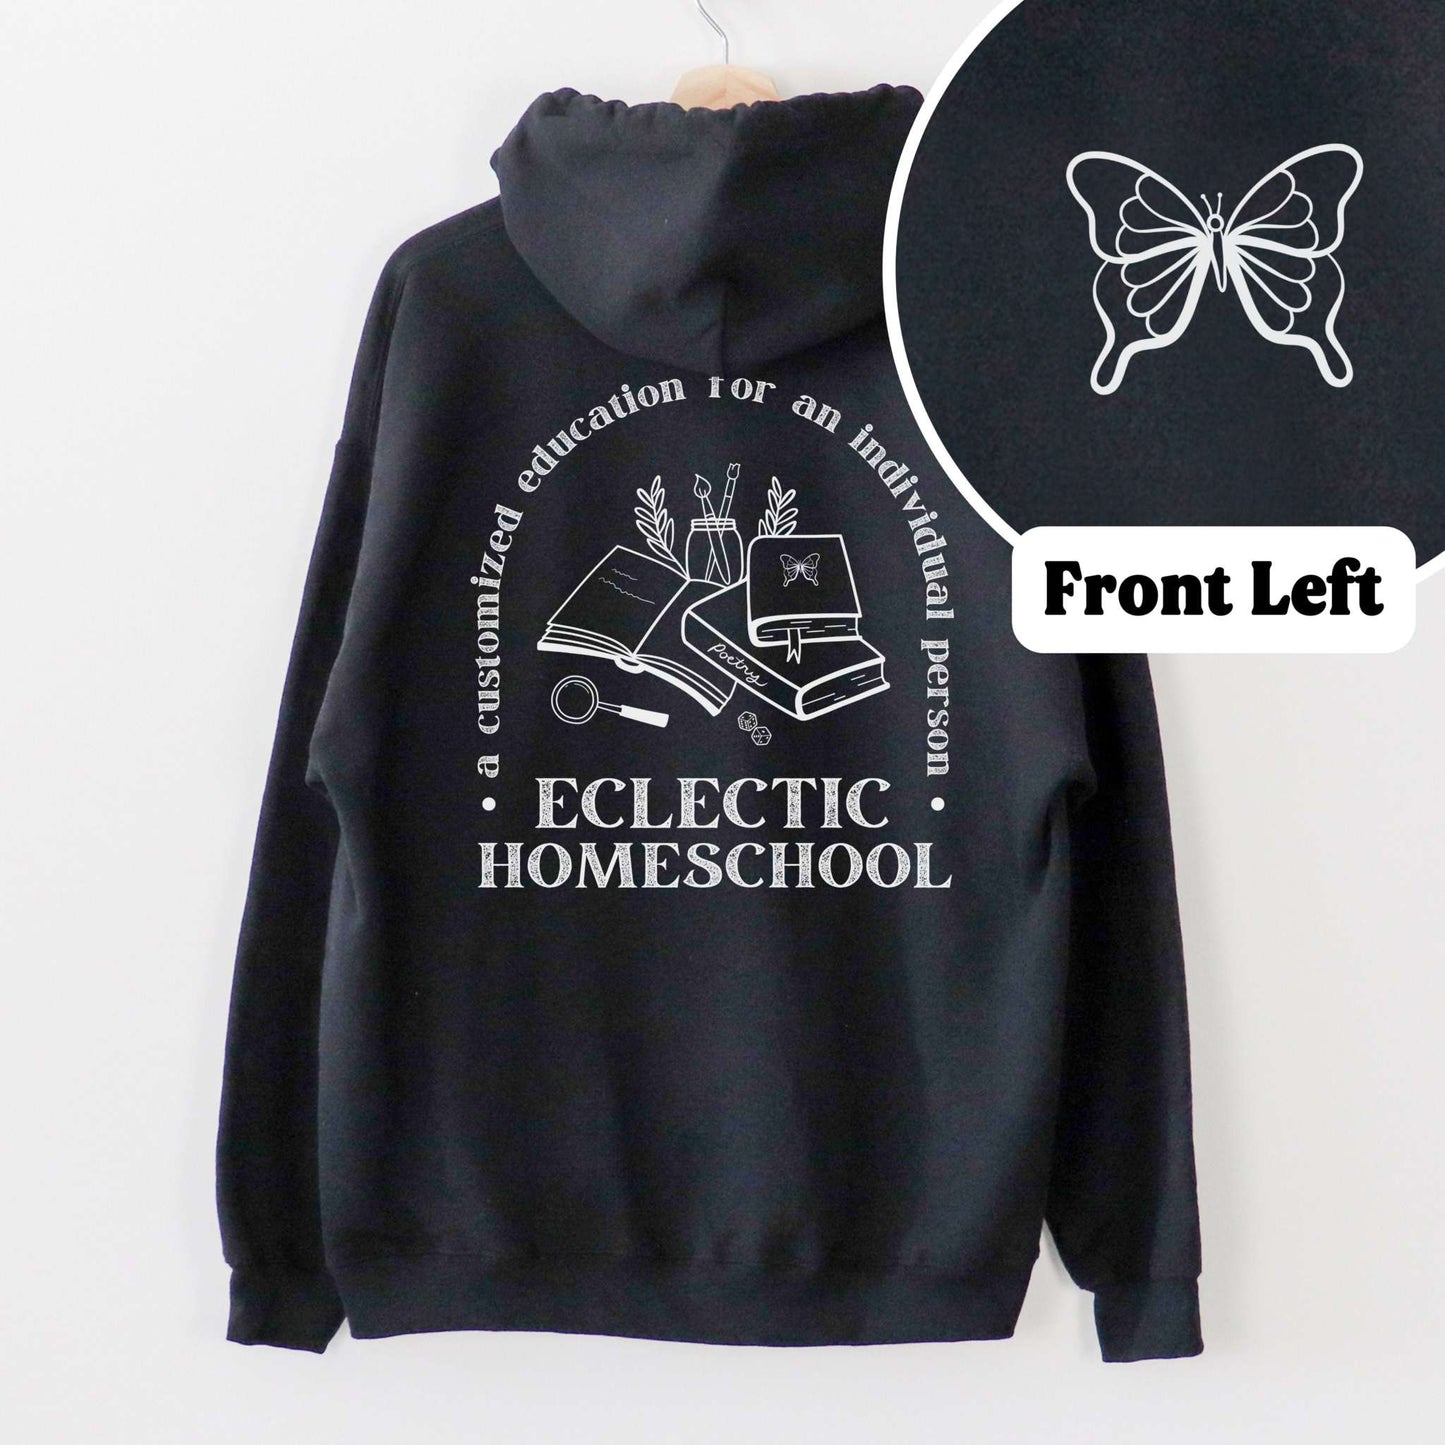 Eclectic Homeschool Hooded SweatshirtWolfe Paw DesignsEclectic Homeschool Hooded SweatshirtA comfy hooded sweater for the eclectic homeschool mamas.
Back displays: A customized education for an individual person
Also available in a Tee Shirt: Click Here
anEclectic Homeschool Hooded Sweatshirt for moms